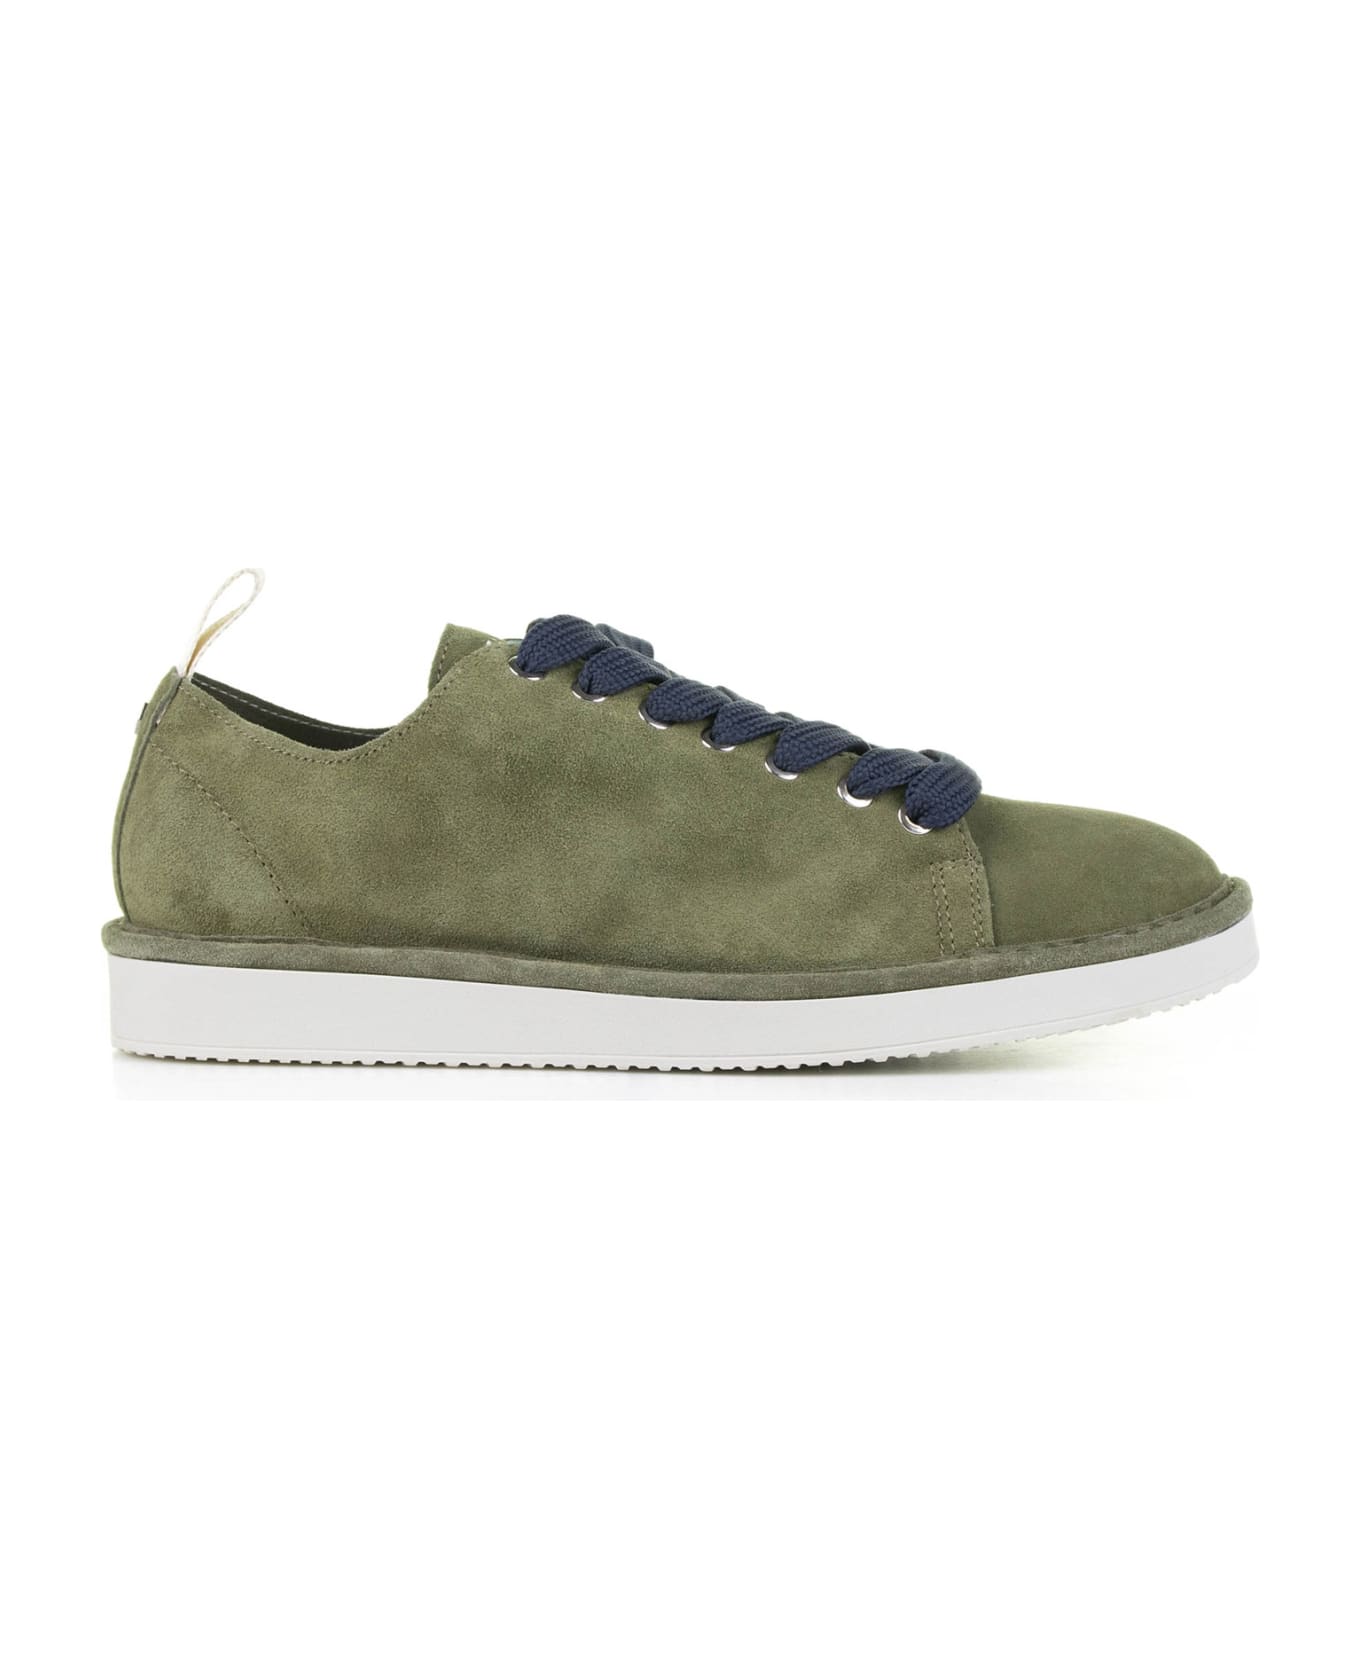 Panchic Sneaker In Military Green Suede - FOREST-NIGHT COBALT